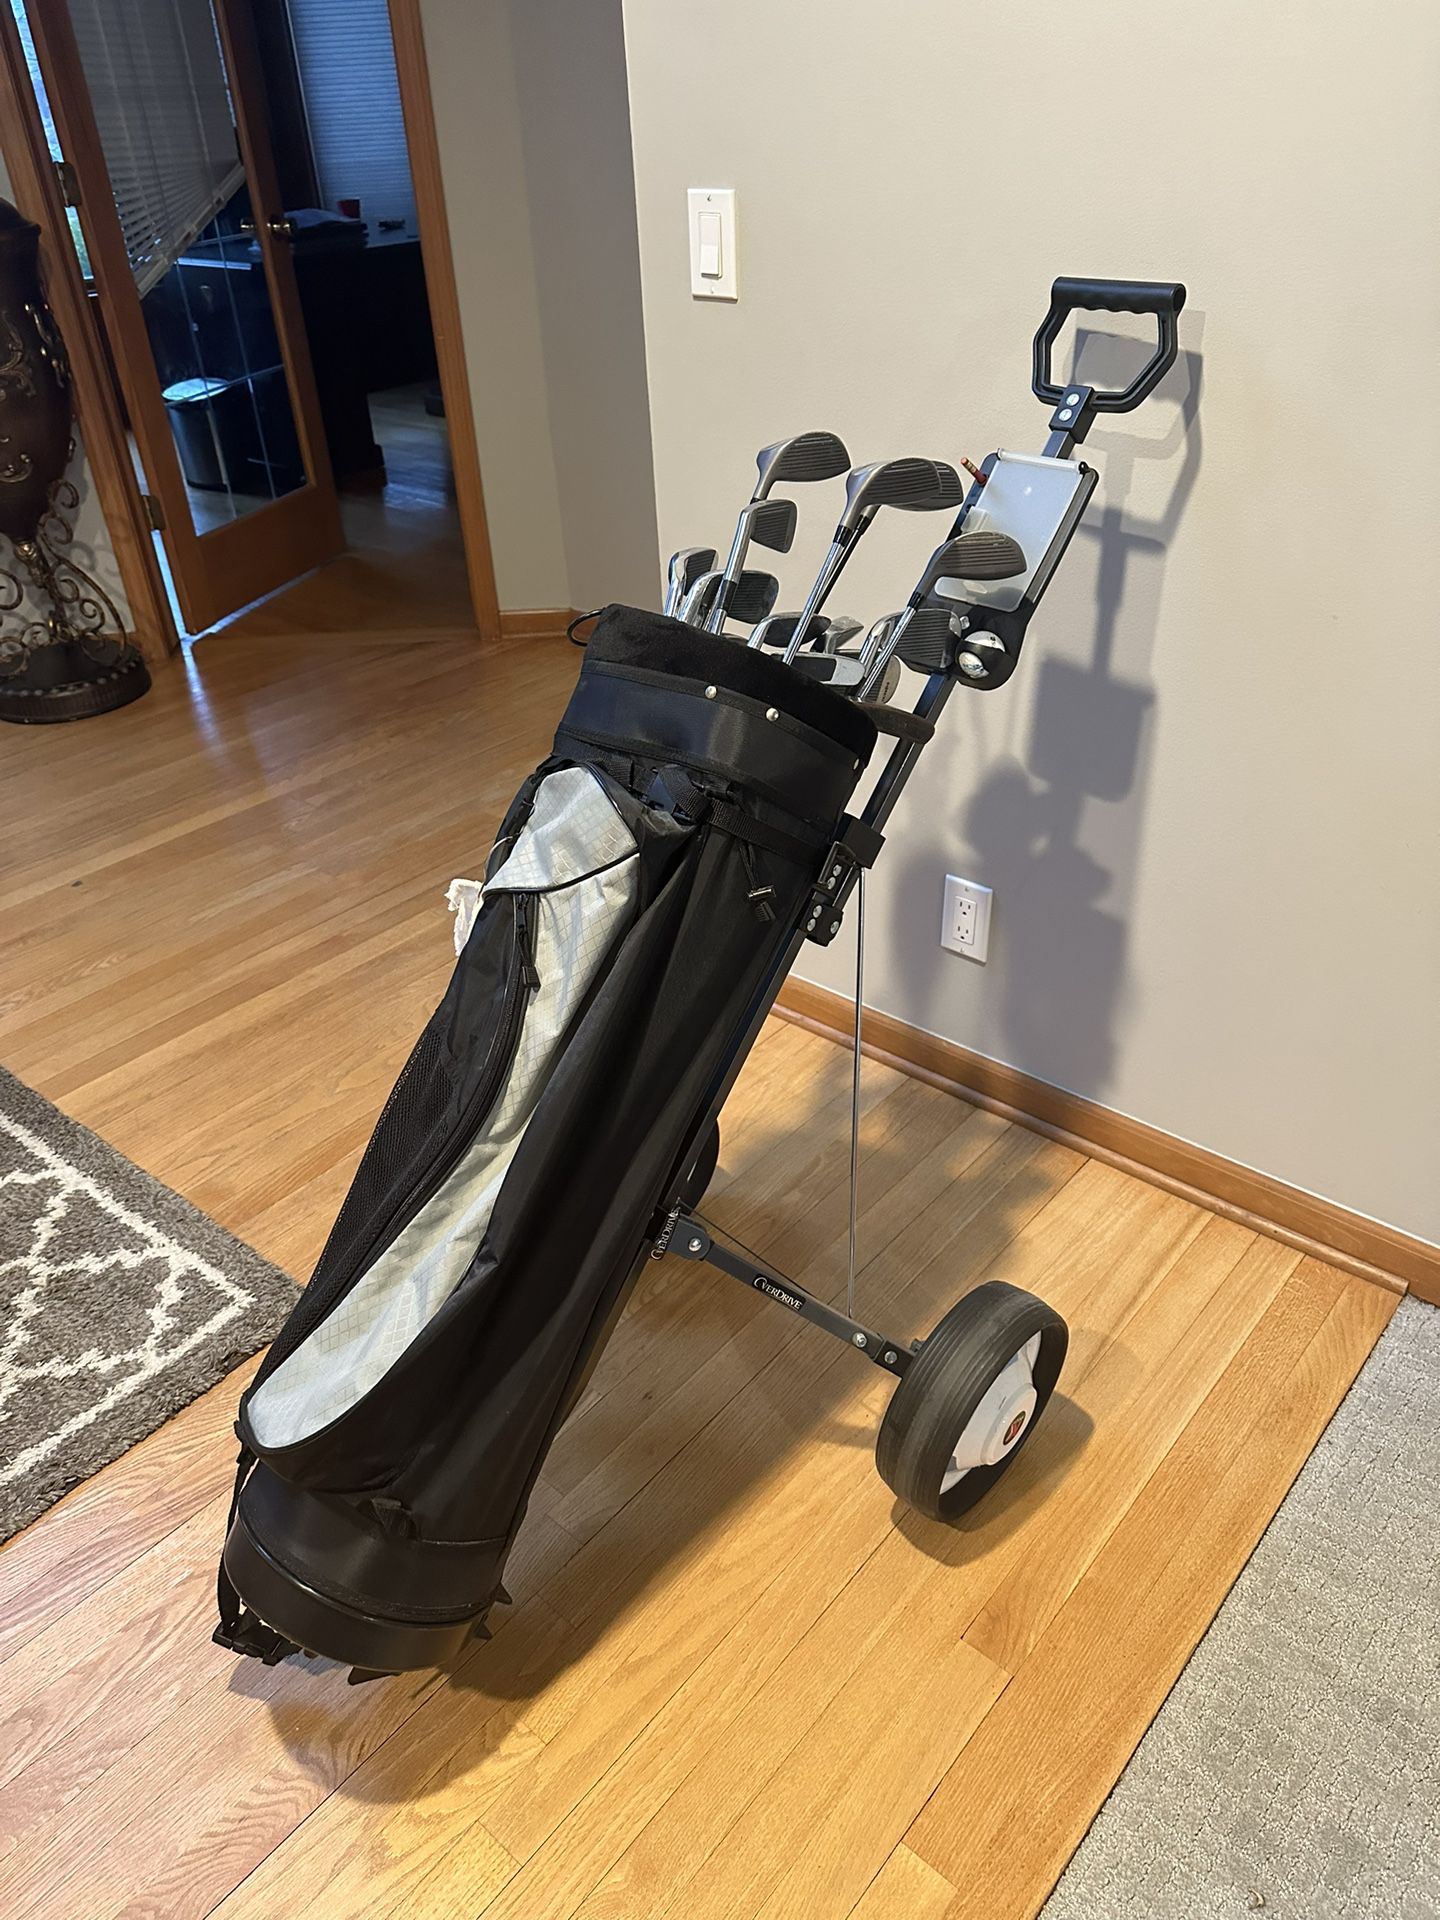 Acculine men’s golf clubs with golf bag and golf cart